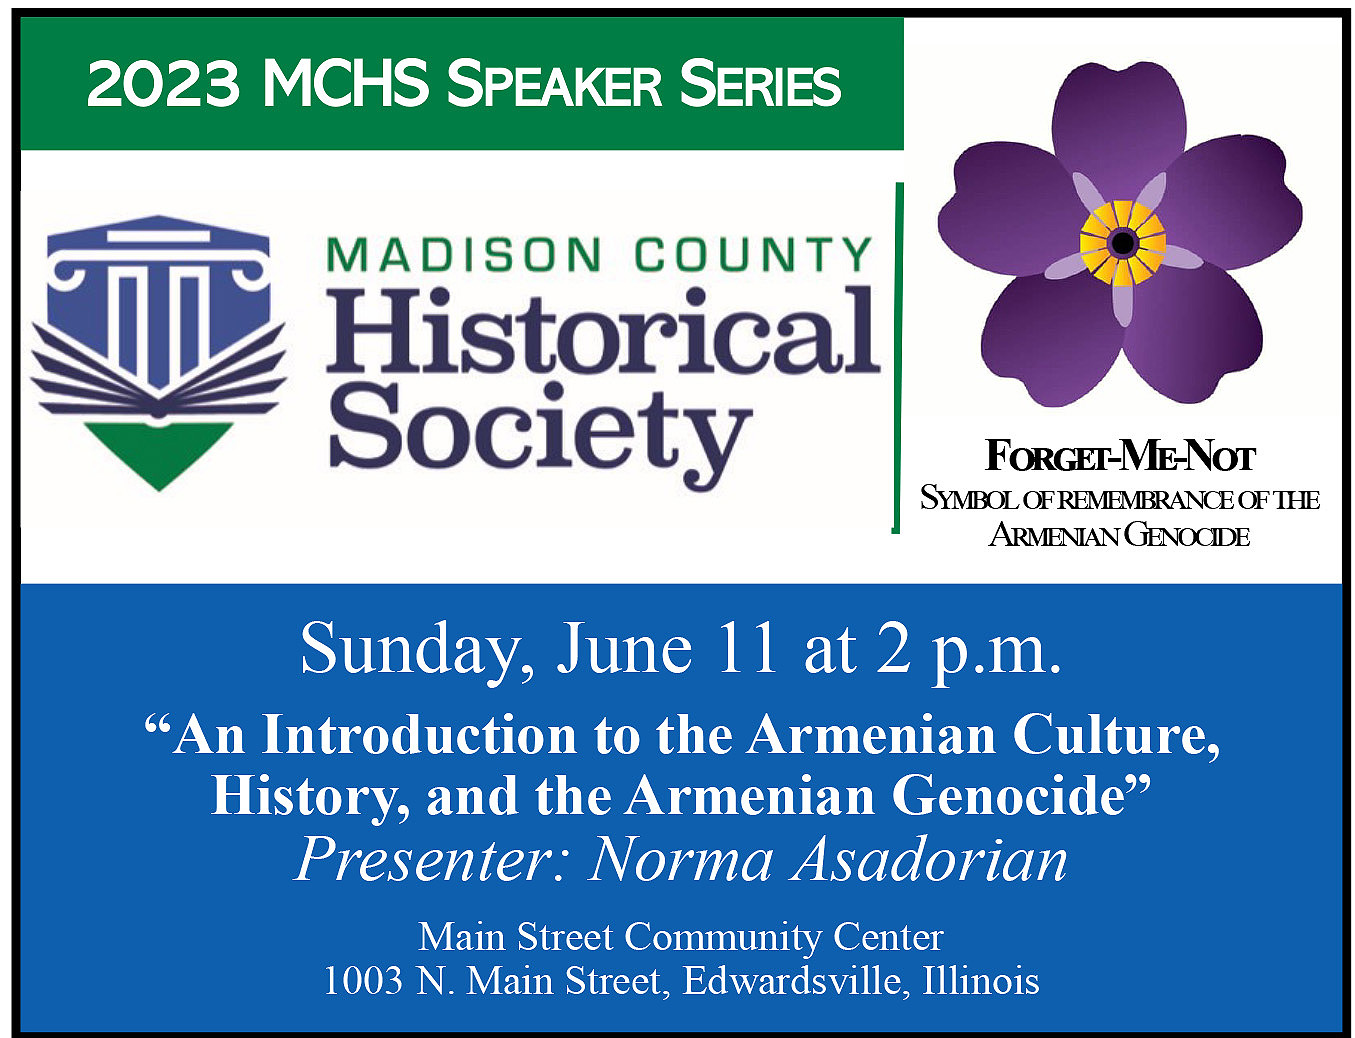 Armenia will be the focus of June speaker series at historical society